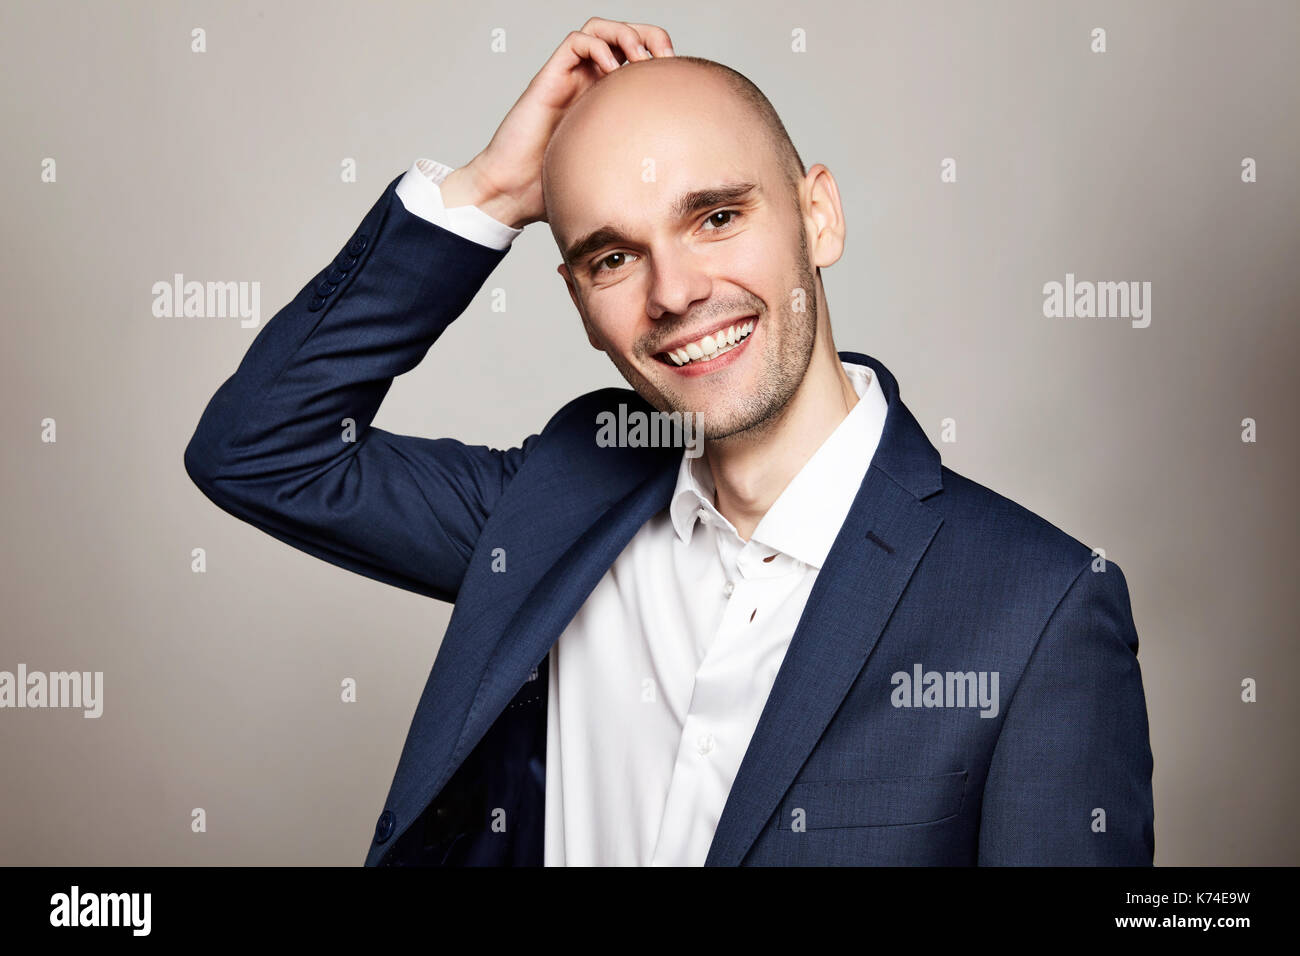 Close-up portrait of a young bald man stroking his head. He is smiling. Gray background. Horizontal. Stock Photo